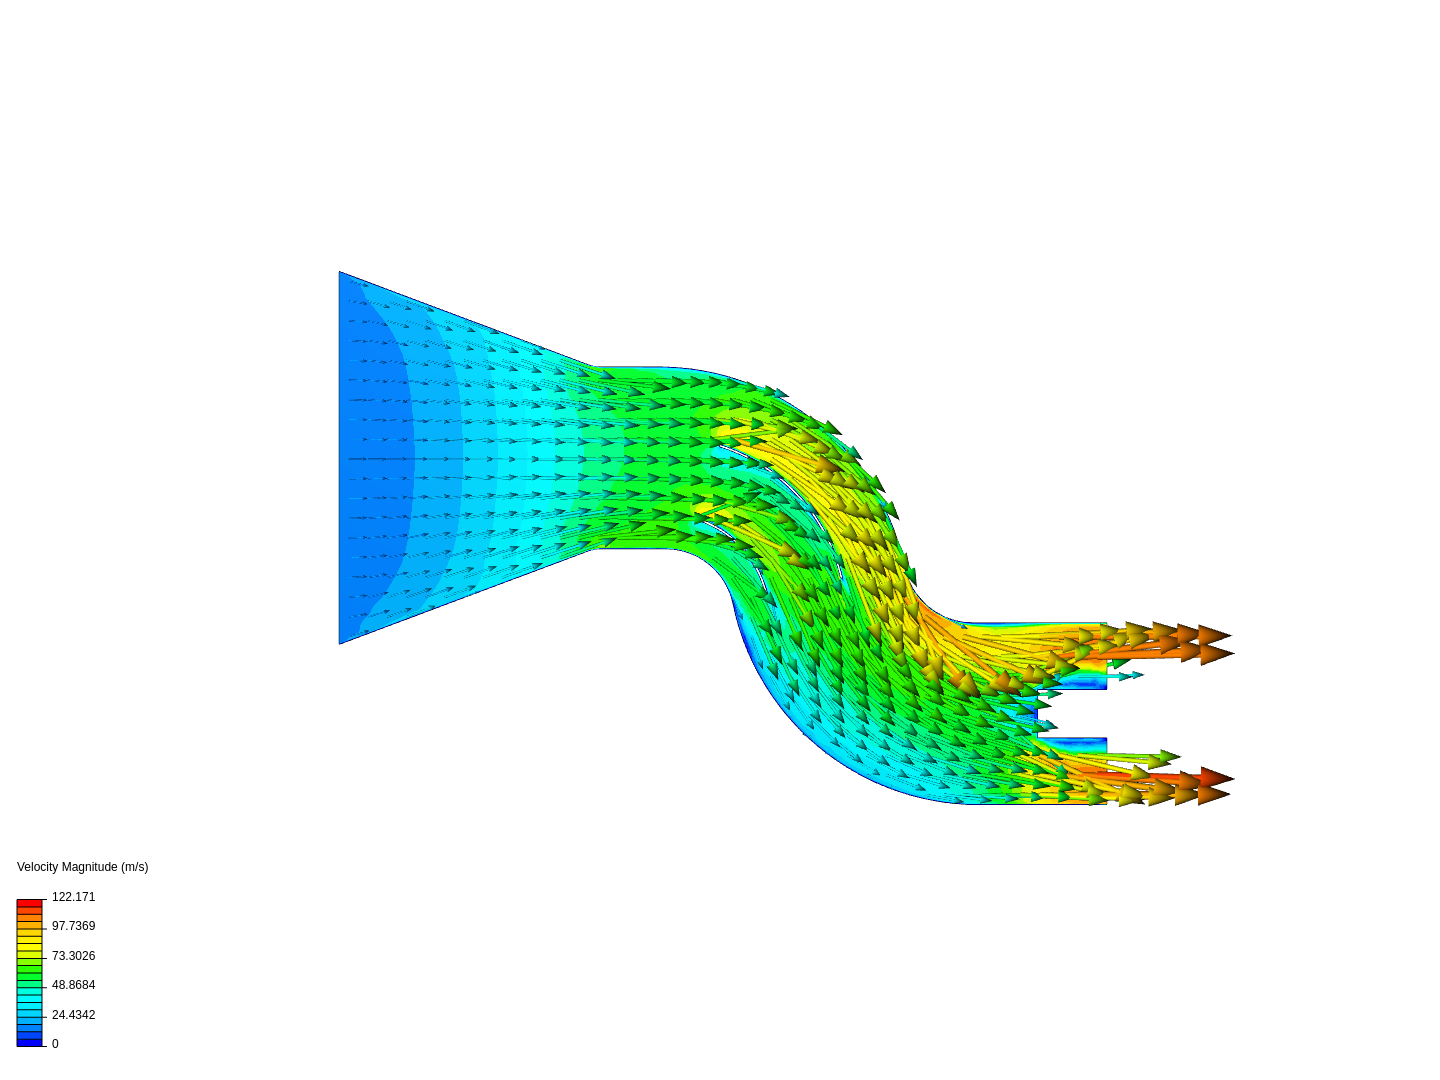 Duct cfd image